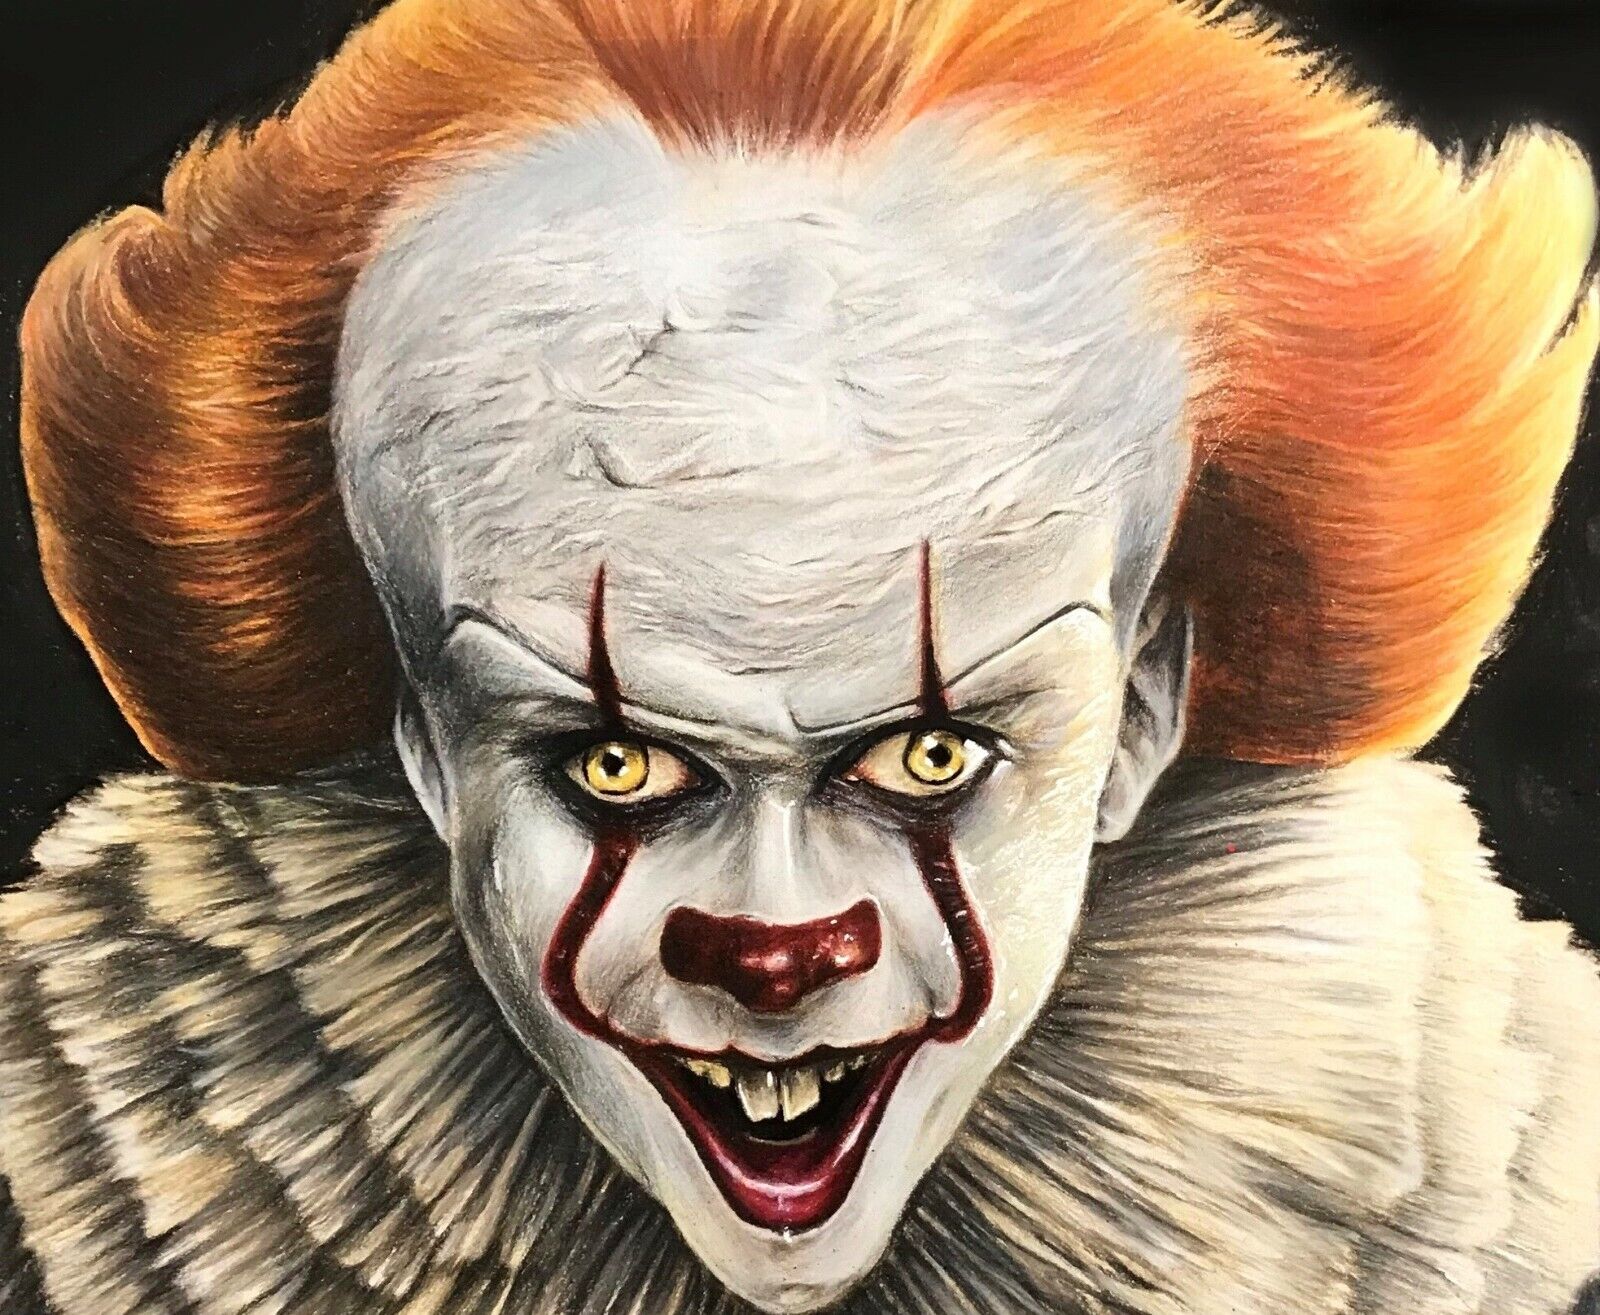 High Quality Drawing - Skarsgard as Pennywise from 'It' Blank Meme Template